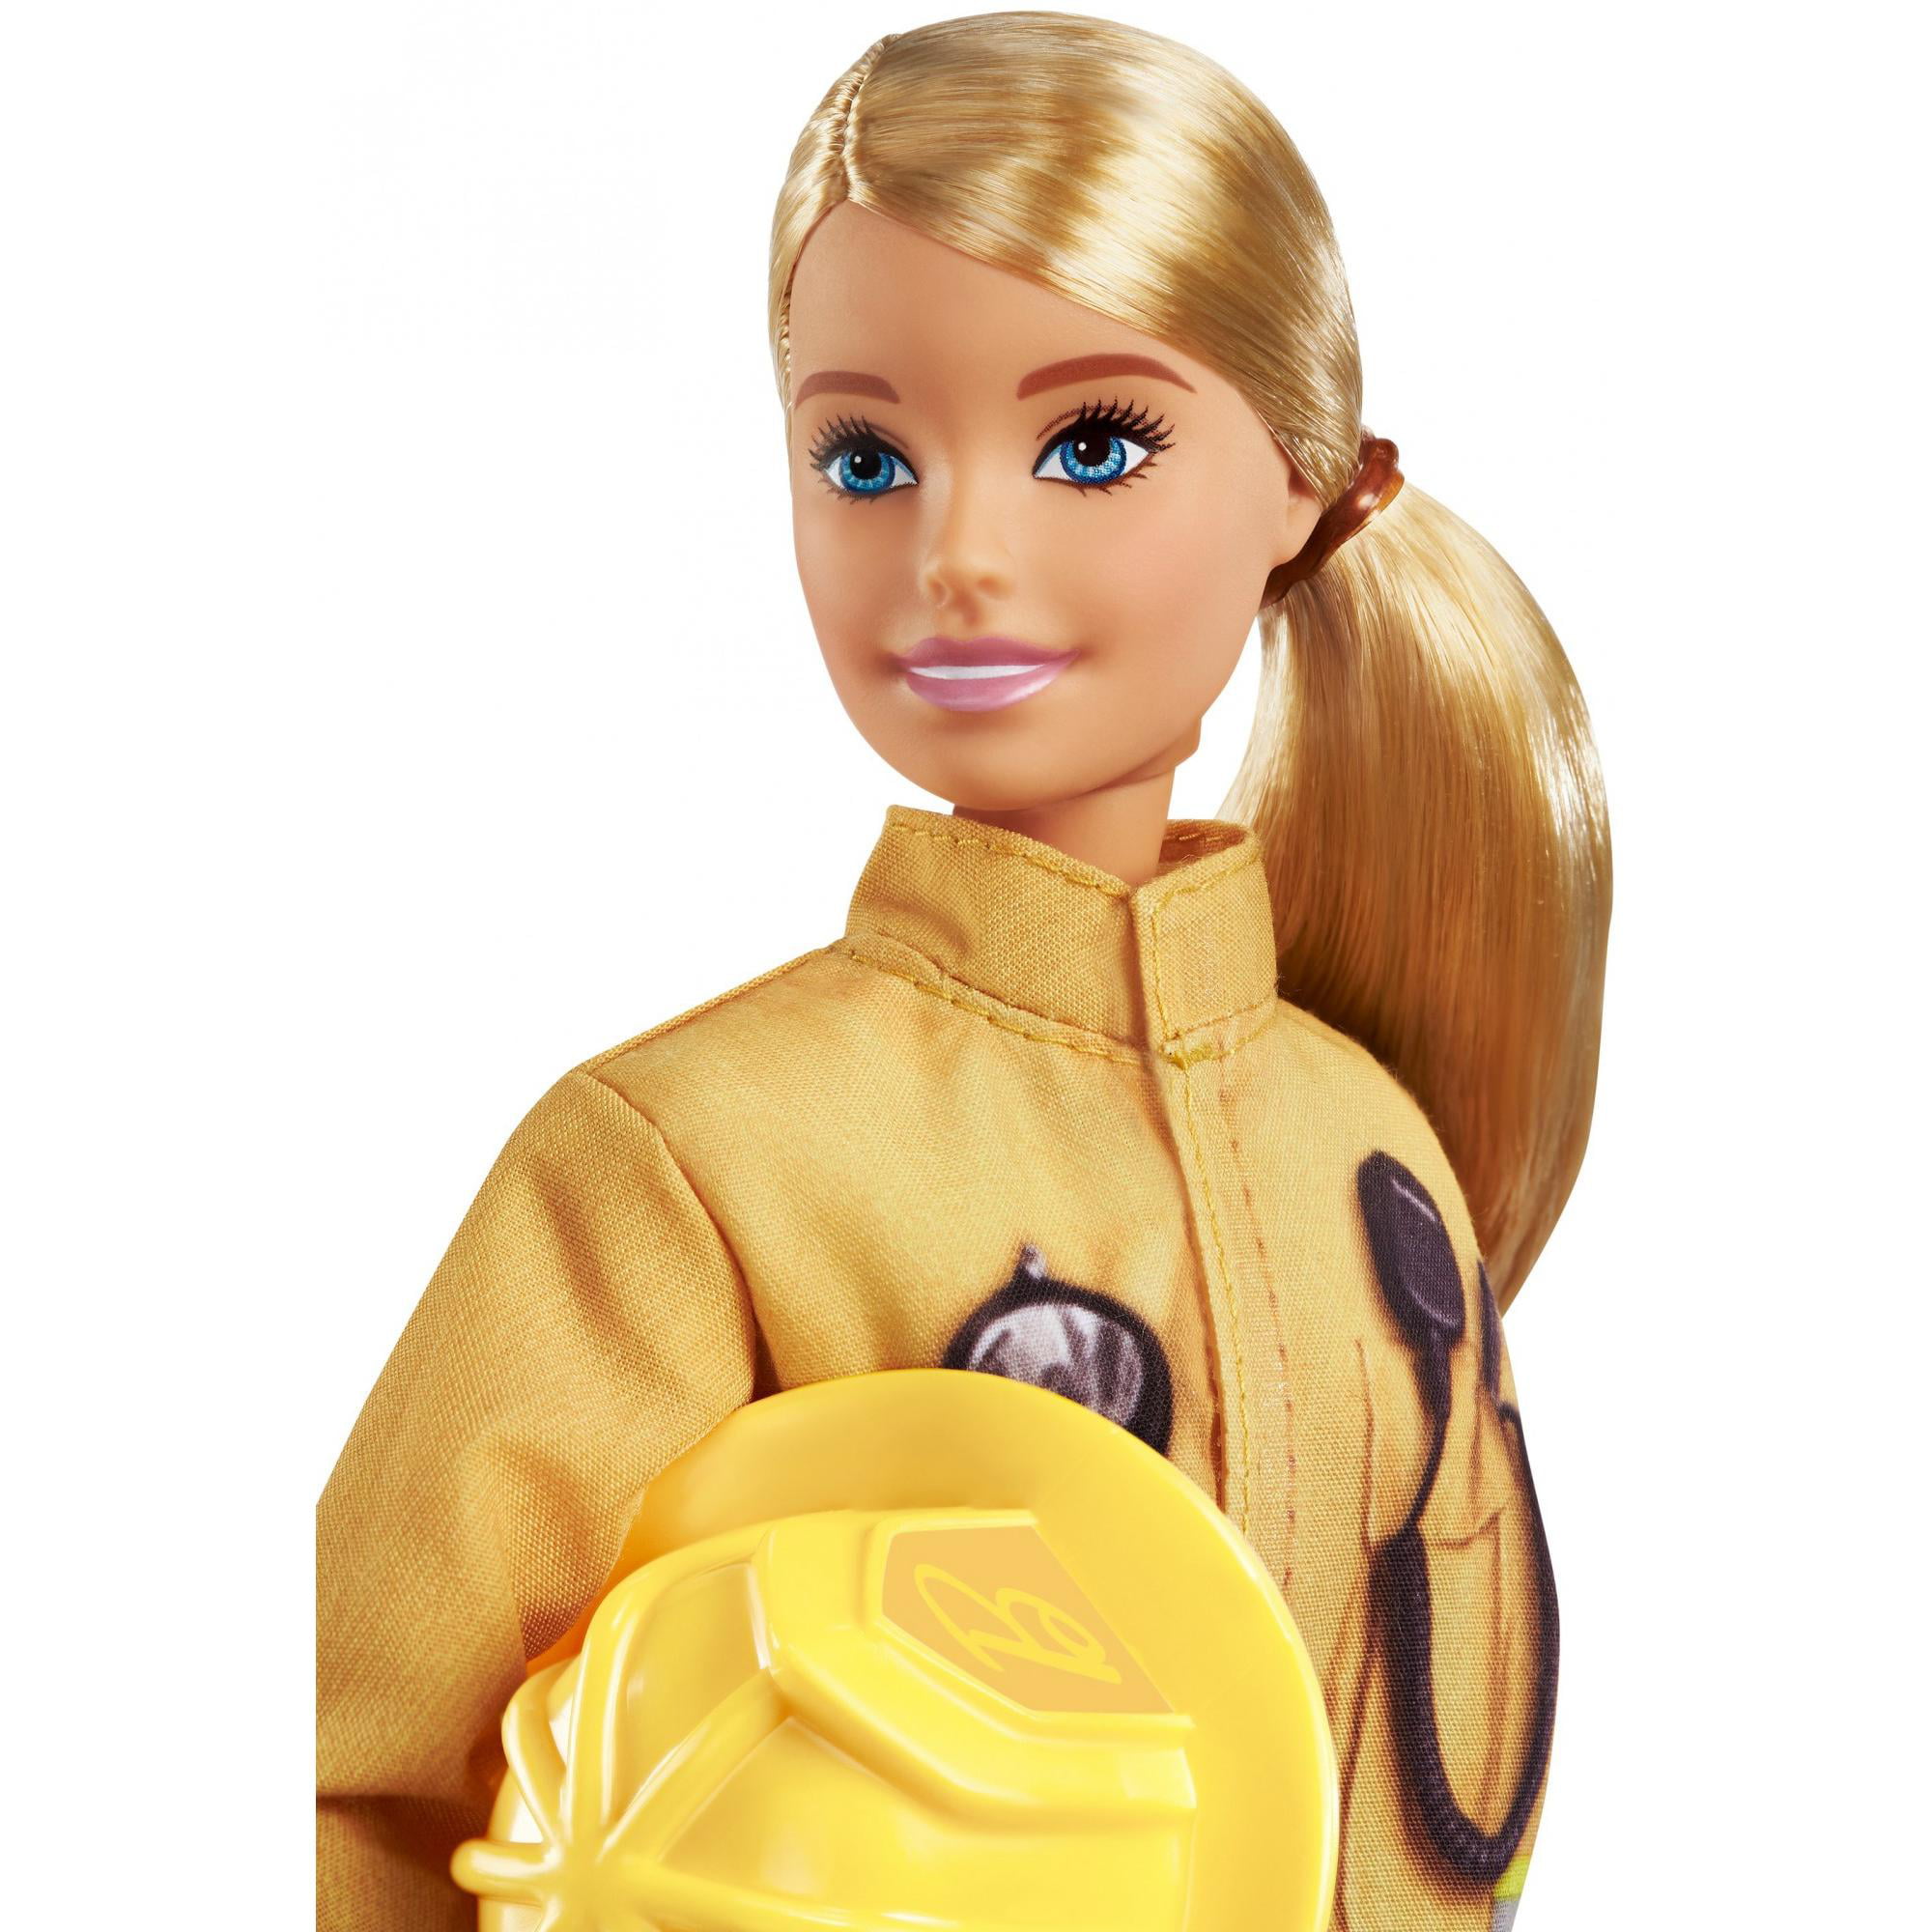 Barbie Doll Fire Fighter Career DollBlonde60th Anniversary *Brand New* 